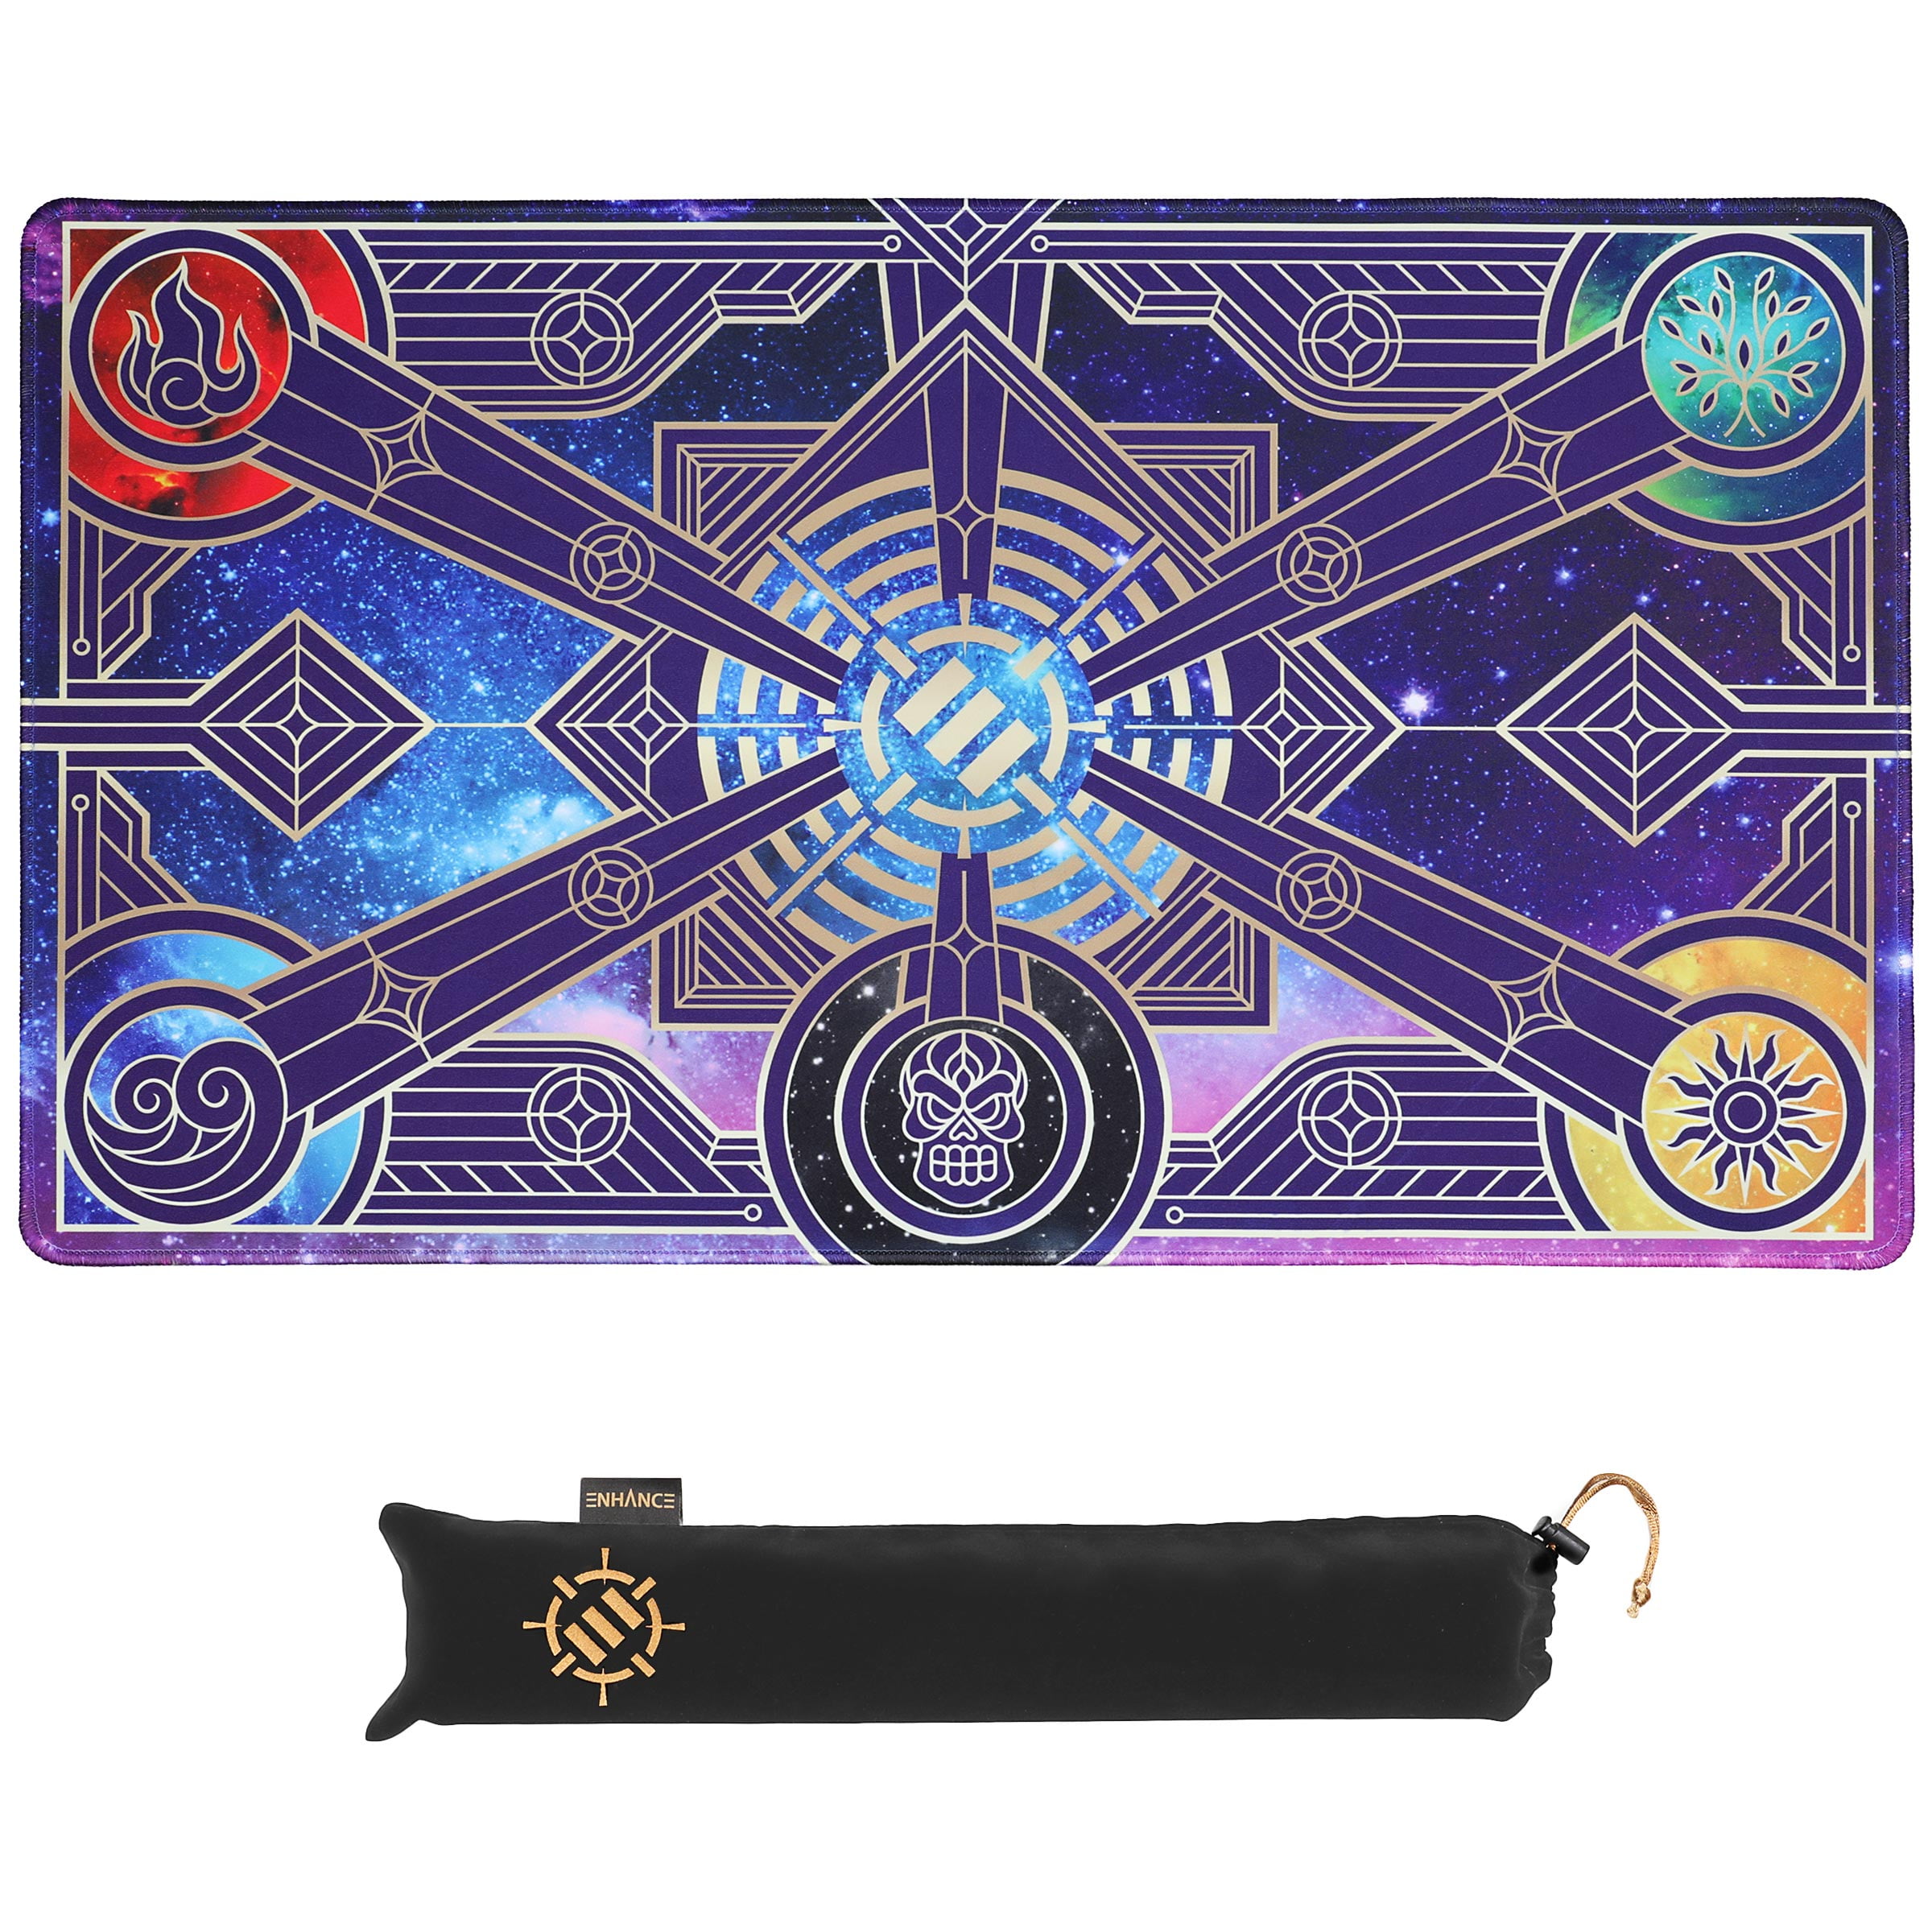 Playmat Sold Separately Vibrancy Playmat Bag Carrying Case by Inked Gaming Perfect for TCG Card Gaming Magic The Gathering and Yu-Gi-Oh Playmat Tube Playmat Case